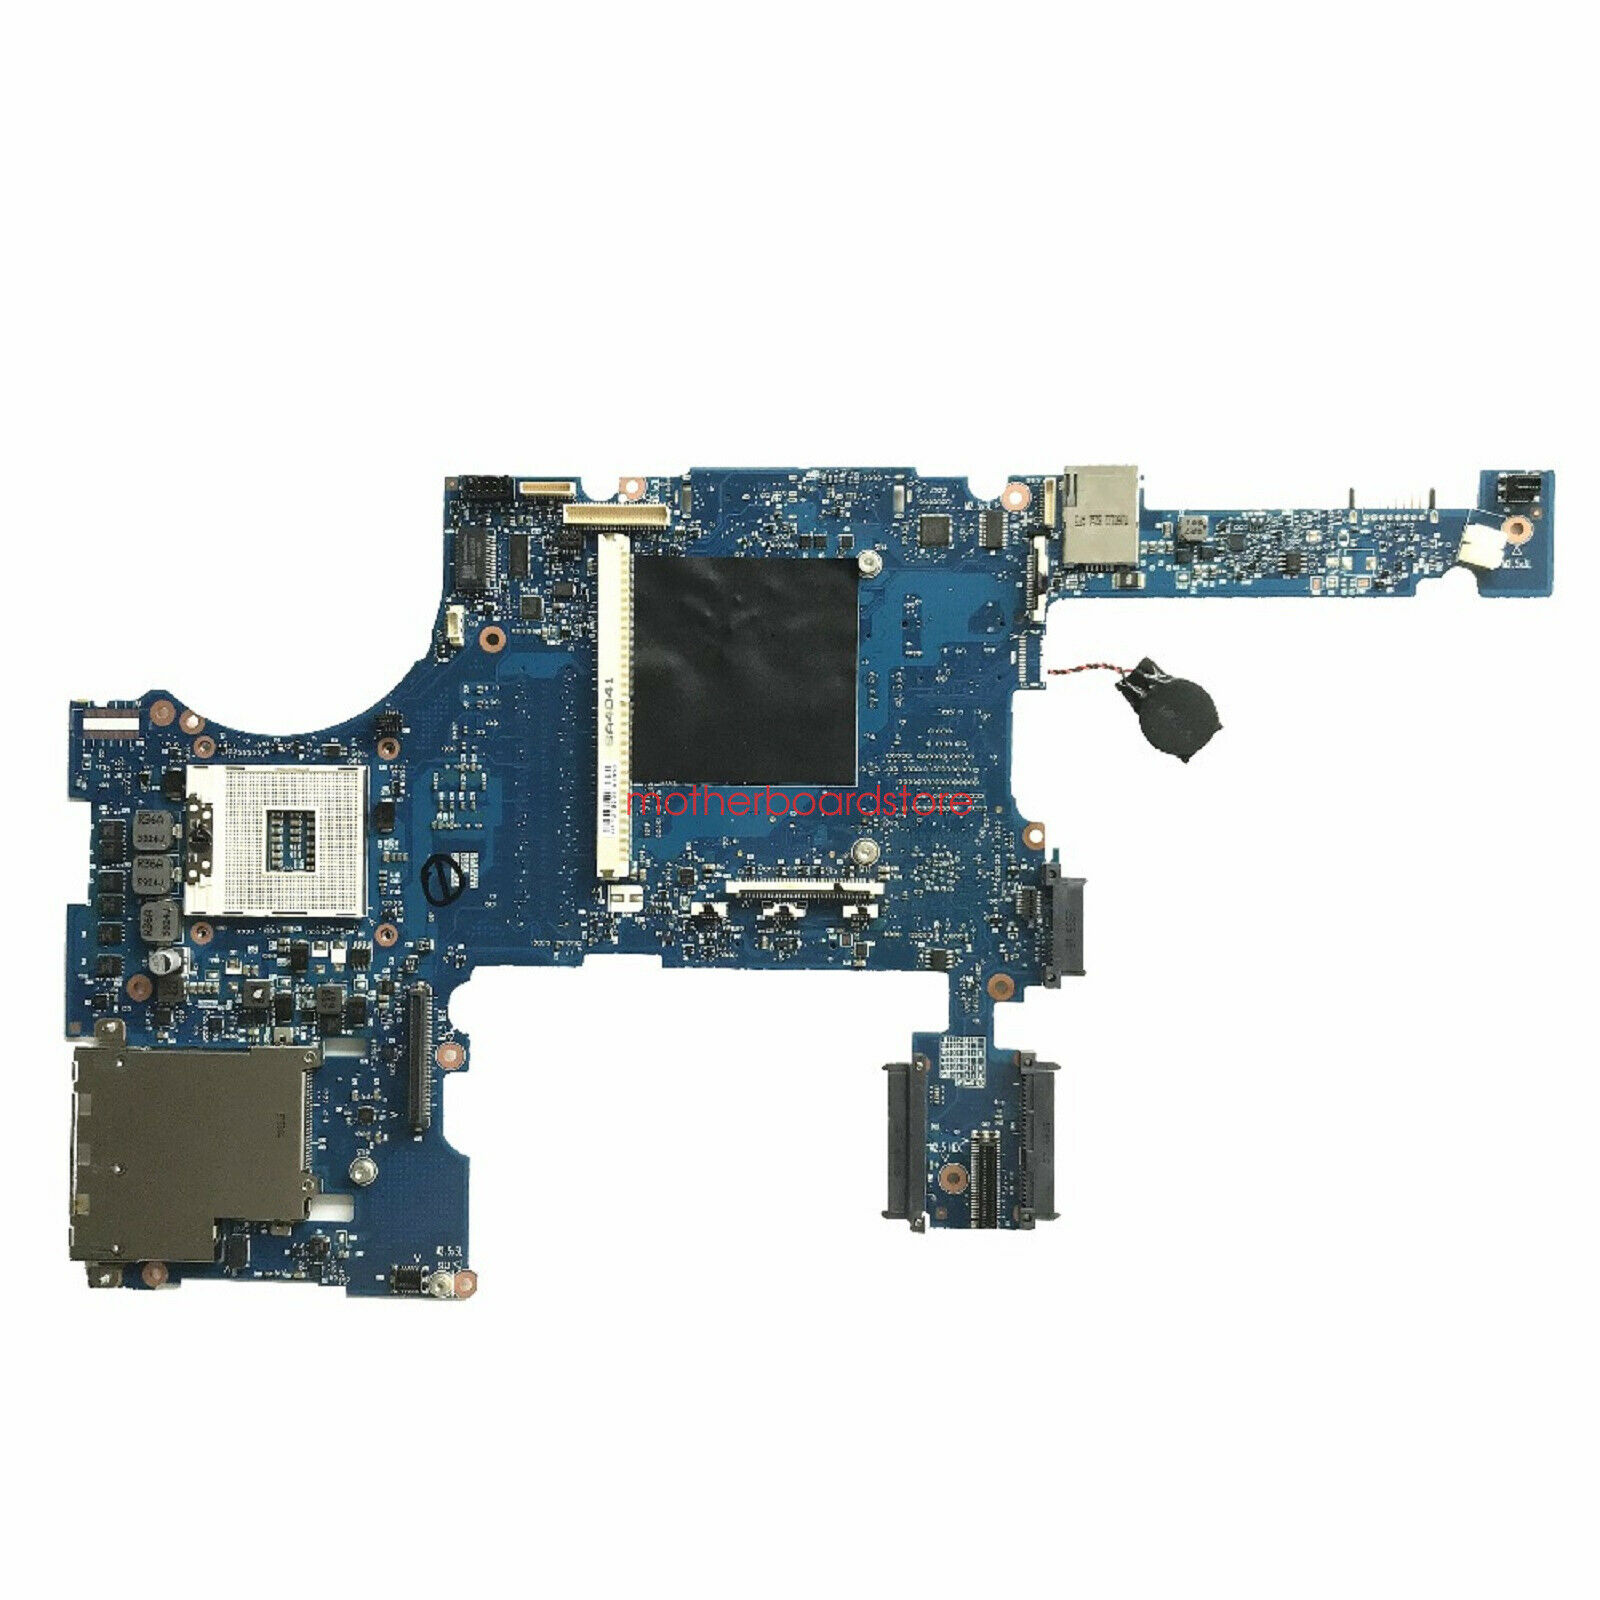 HP 8760W Intel QM67 Motherboard 652508-501 652508-001 Tested Good Brand: HP Number of Memory Slots: 2 MP